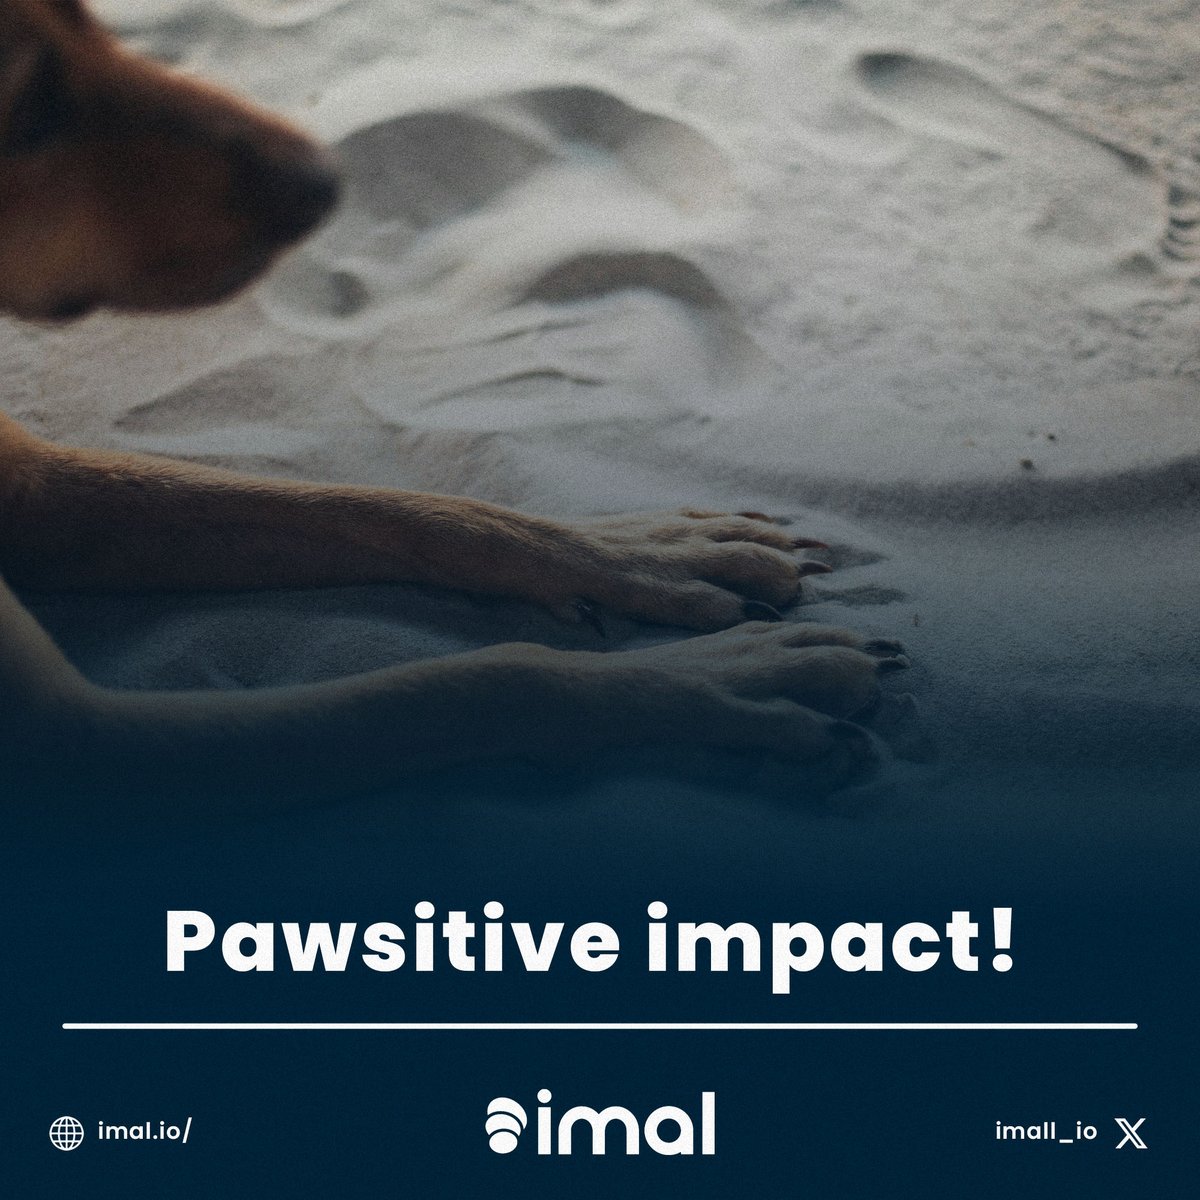 Need a new leash for your pet? Shop IMAL, make difference. #imal #makedifference #rescueanimals #shopwithacause